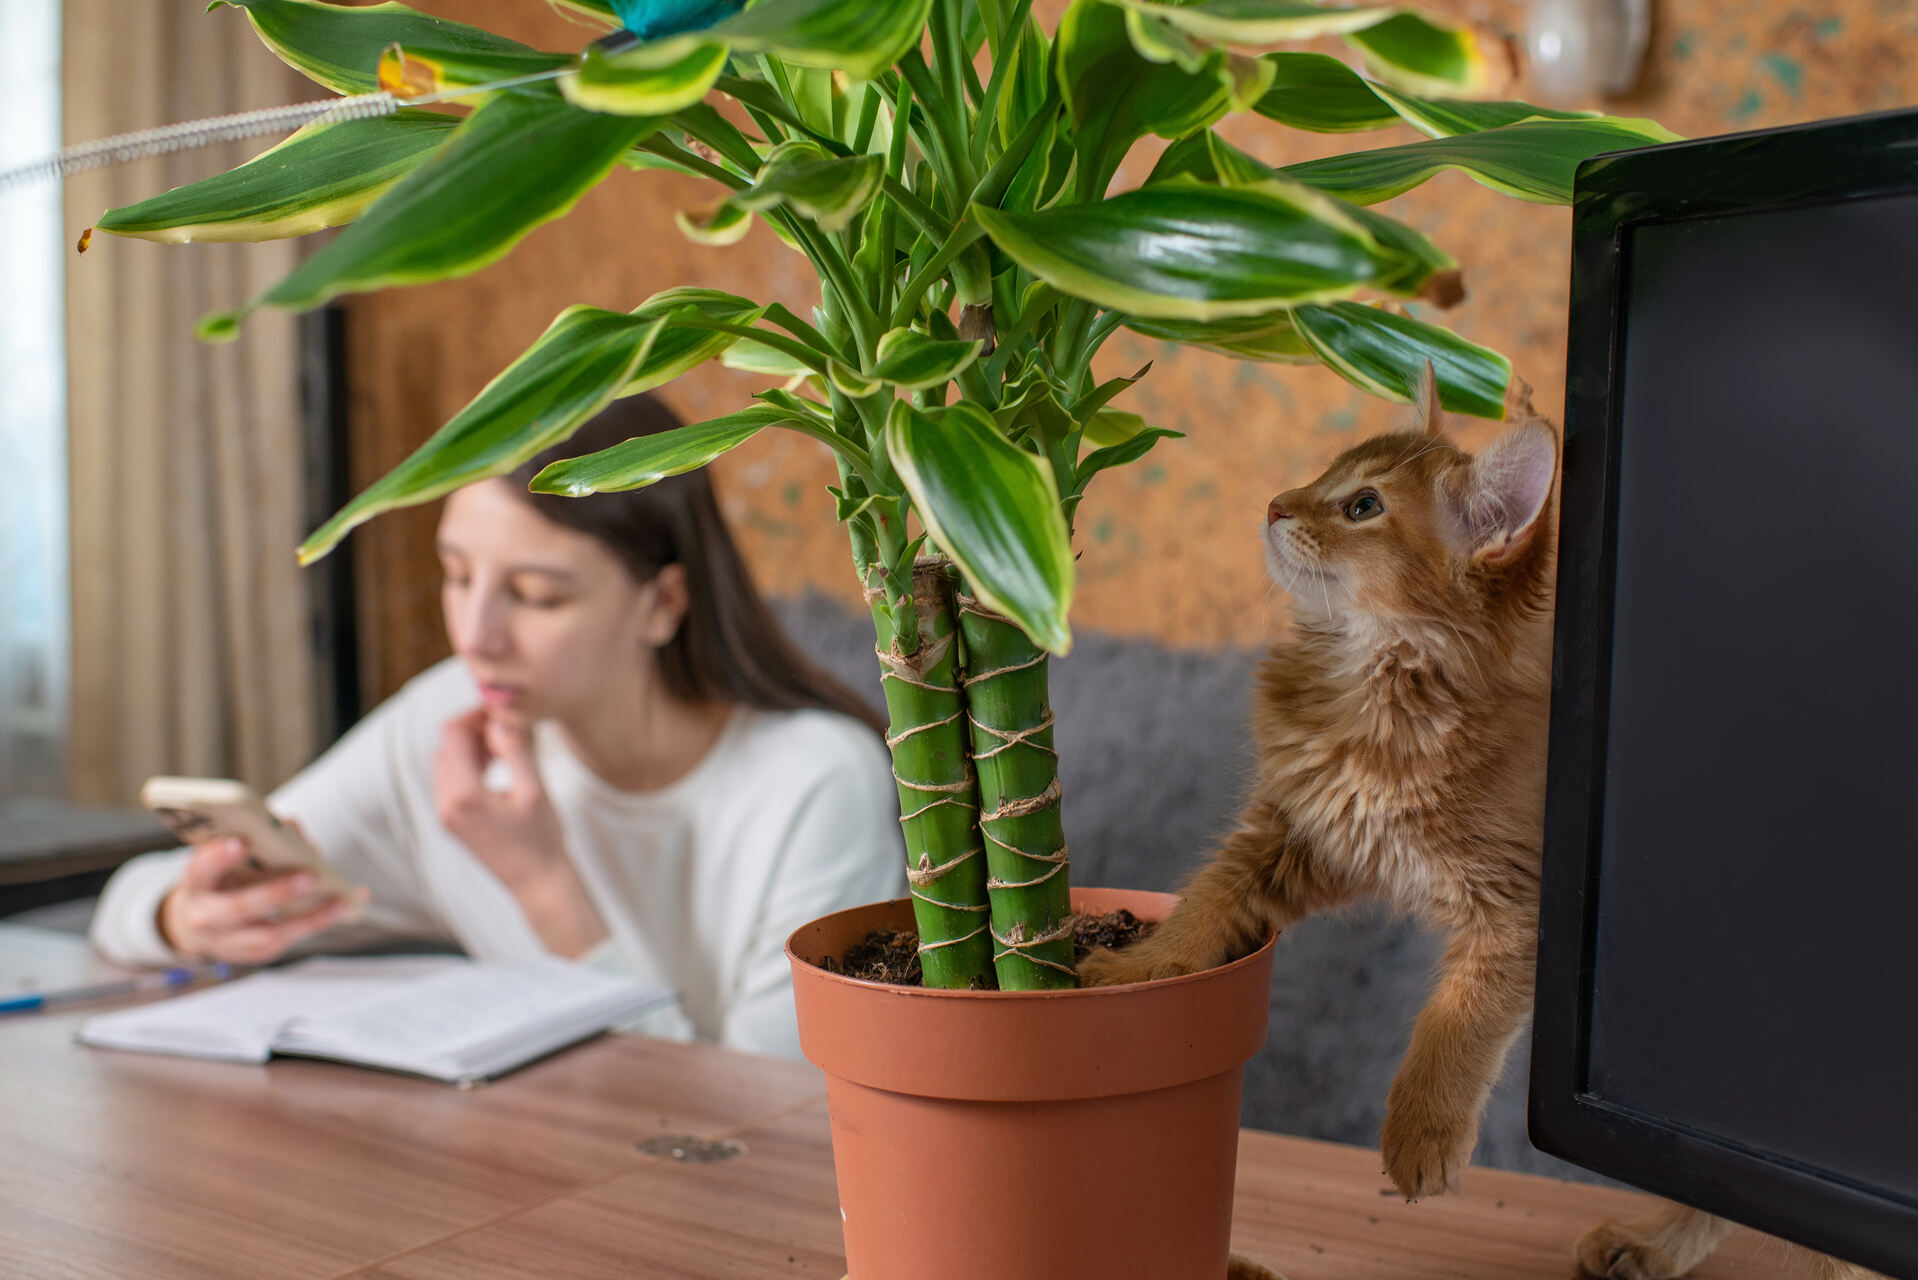 A cat sniffing a plant while a woman checks her phone in the background